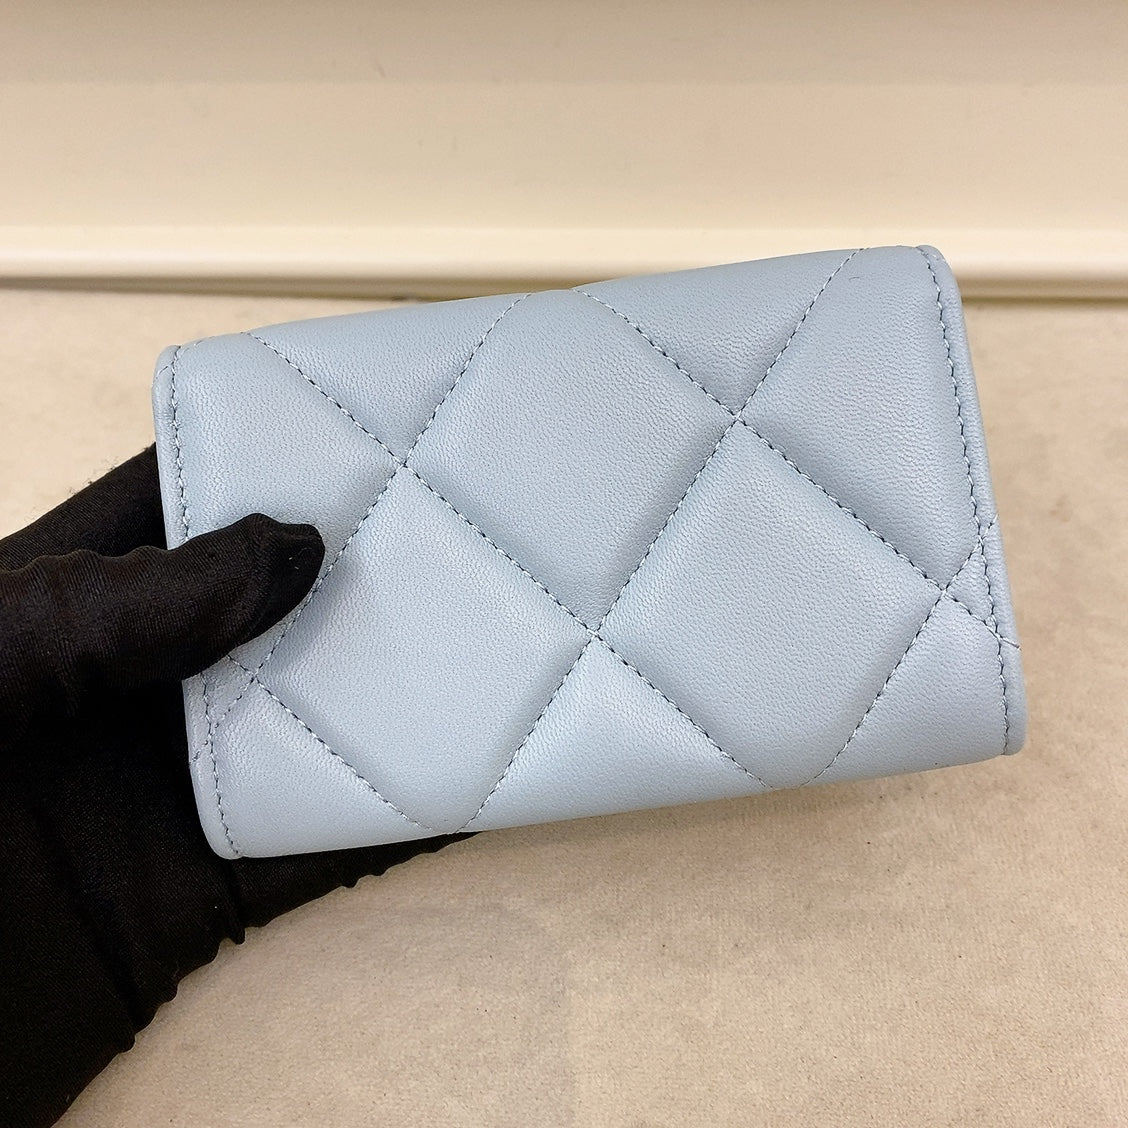 Chanel 19 Quilted Flap Card Holder Blue Lambskin